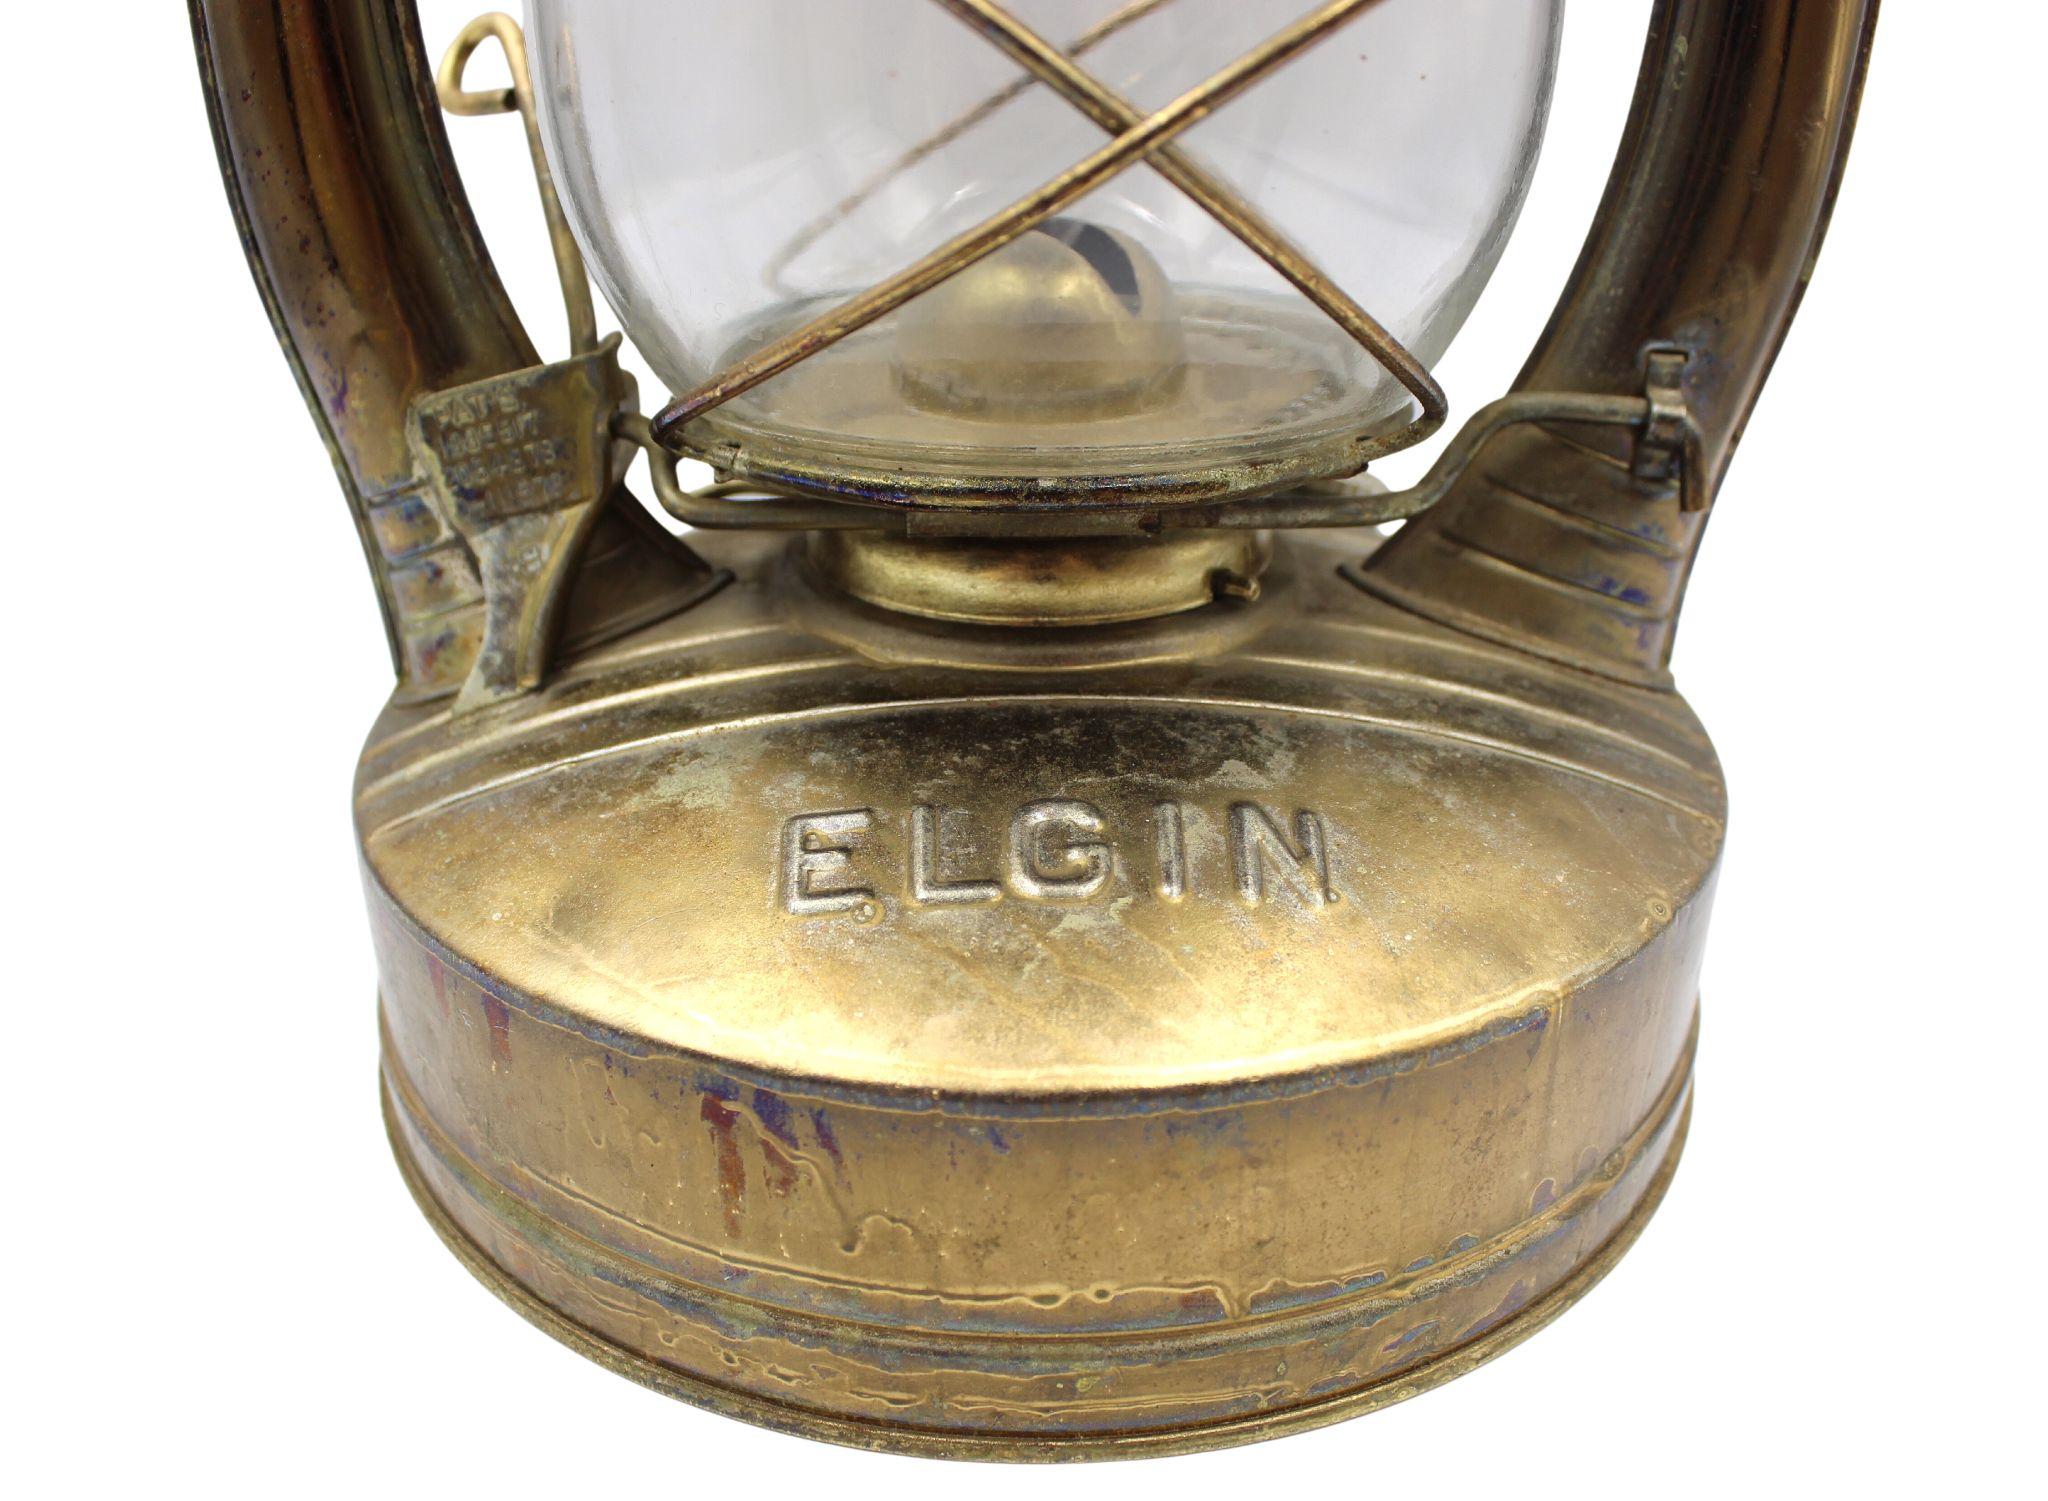 Presented is a vintage Elgin railroad kerosene lantern, with a clear glass globe and wire caging.  The lantern was originally used on the Chicago Aurora and Elgin Railroad, in Illinois. Kerosene lanterns just like this one were used daily by